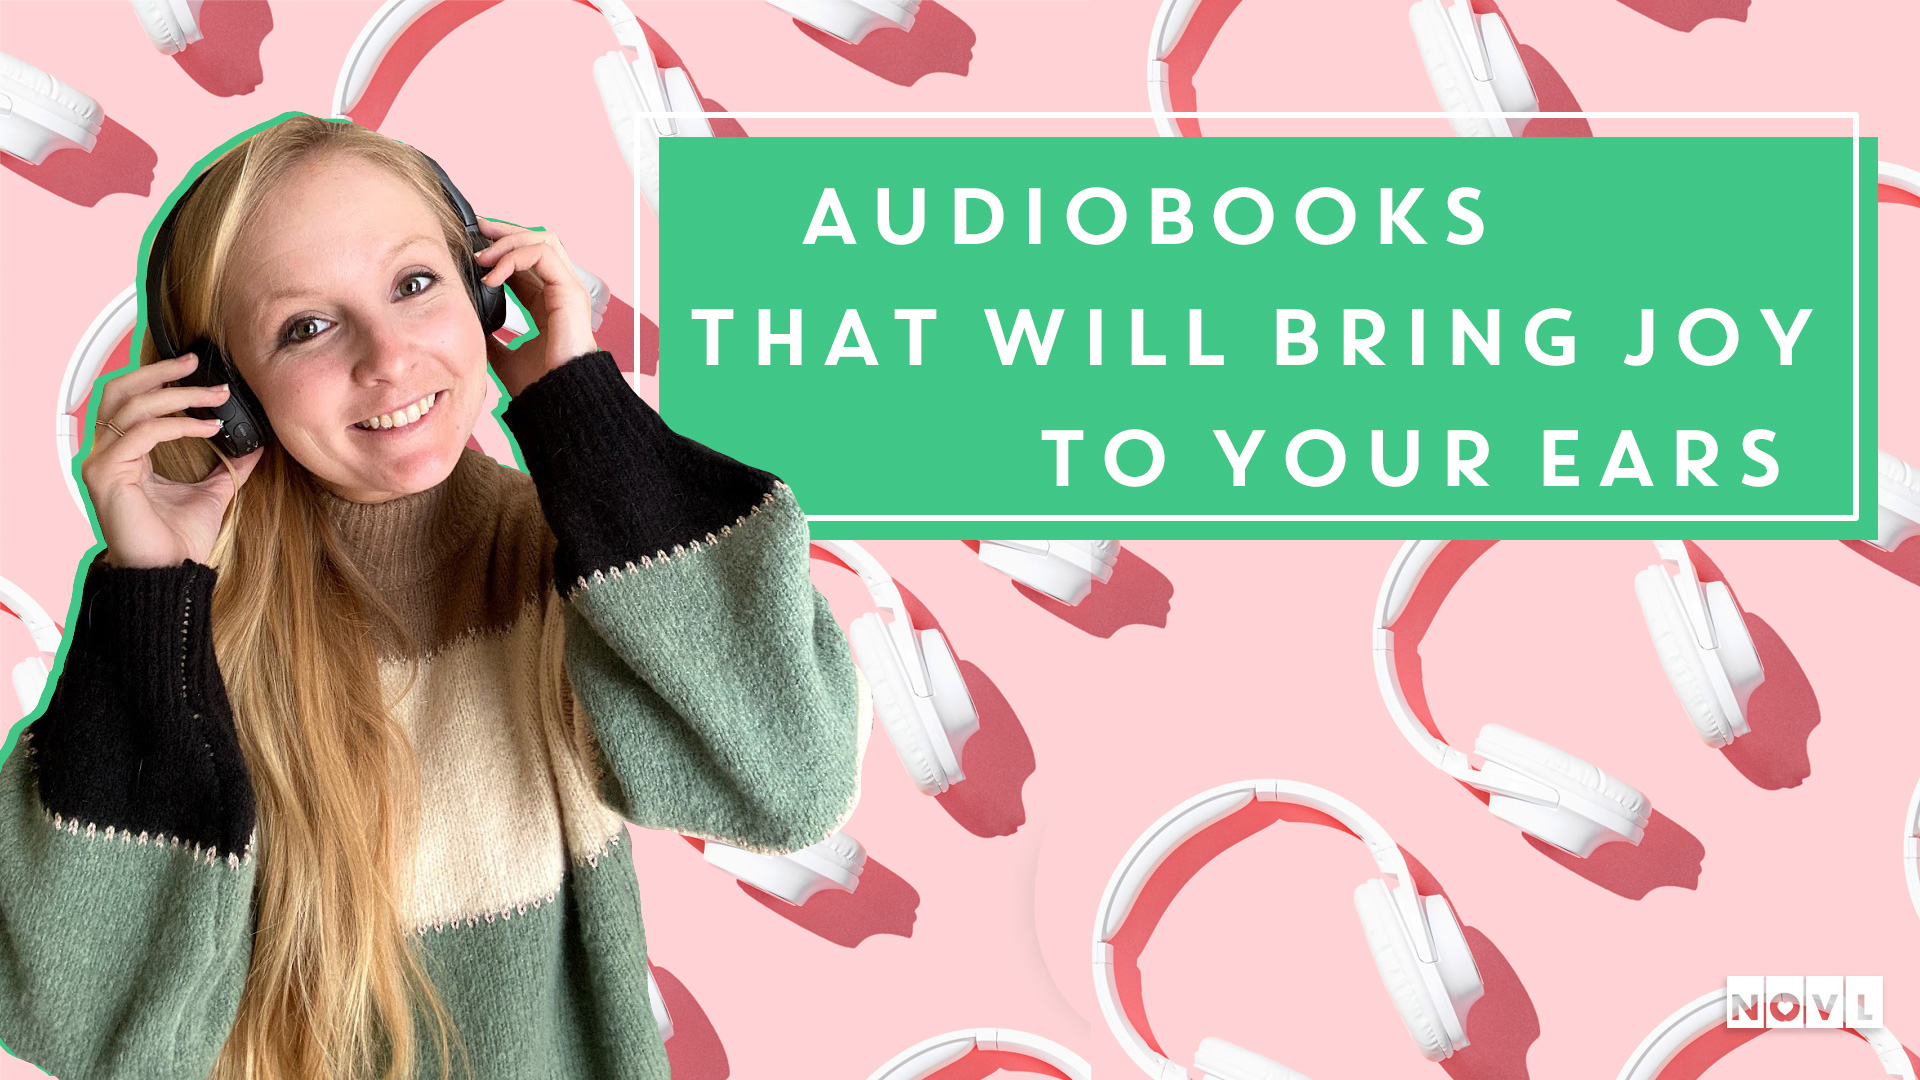 The NOVL Blog, Featured Image for Article: Audiobooks that will bring joy to your ears